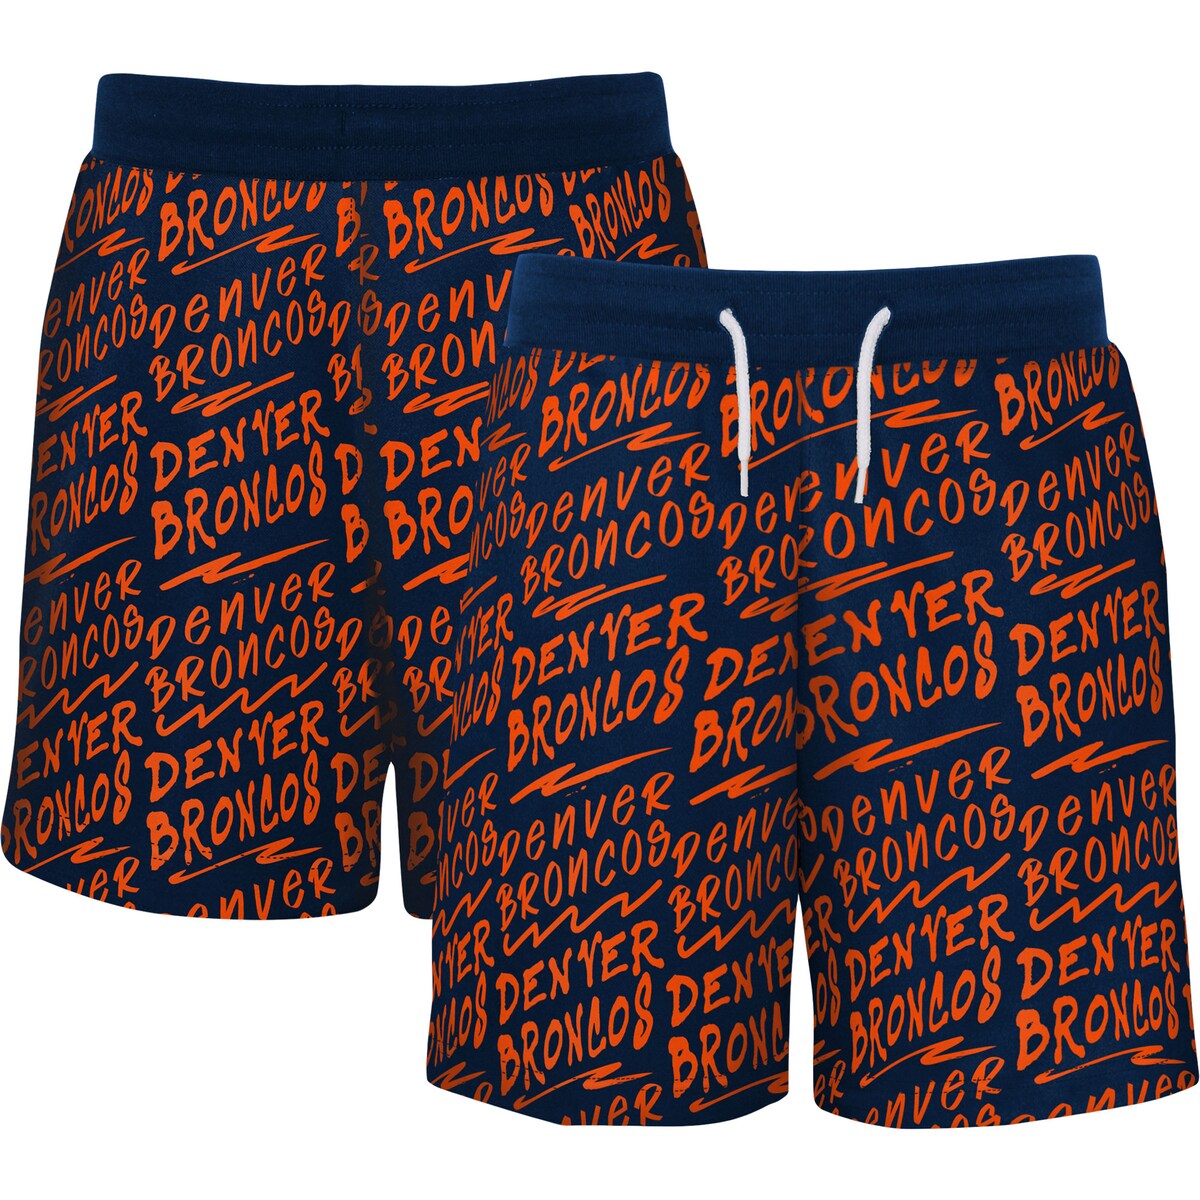 Make Denver Broncos game days relaxing and comfortable at home with these Super shorts. They feature team graphics all over to emphasize your Denver Broncos fandom from all directions. Plus, a French terry lining adds an extra layer of softness and coziness while the side pockets provide convenient storage.Material: 60% Cotton/40% PolyesterTwo side pocketsOfficially licensedElastic waistband with drawstringBrand: OuterstuffScreen print graphicsMachine wash, tumble dry lowInseam on size S measures approx. 5.5"French terry liningImported